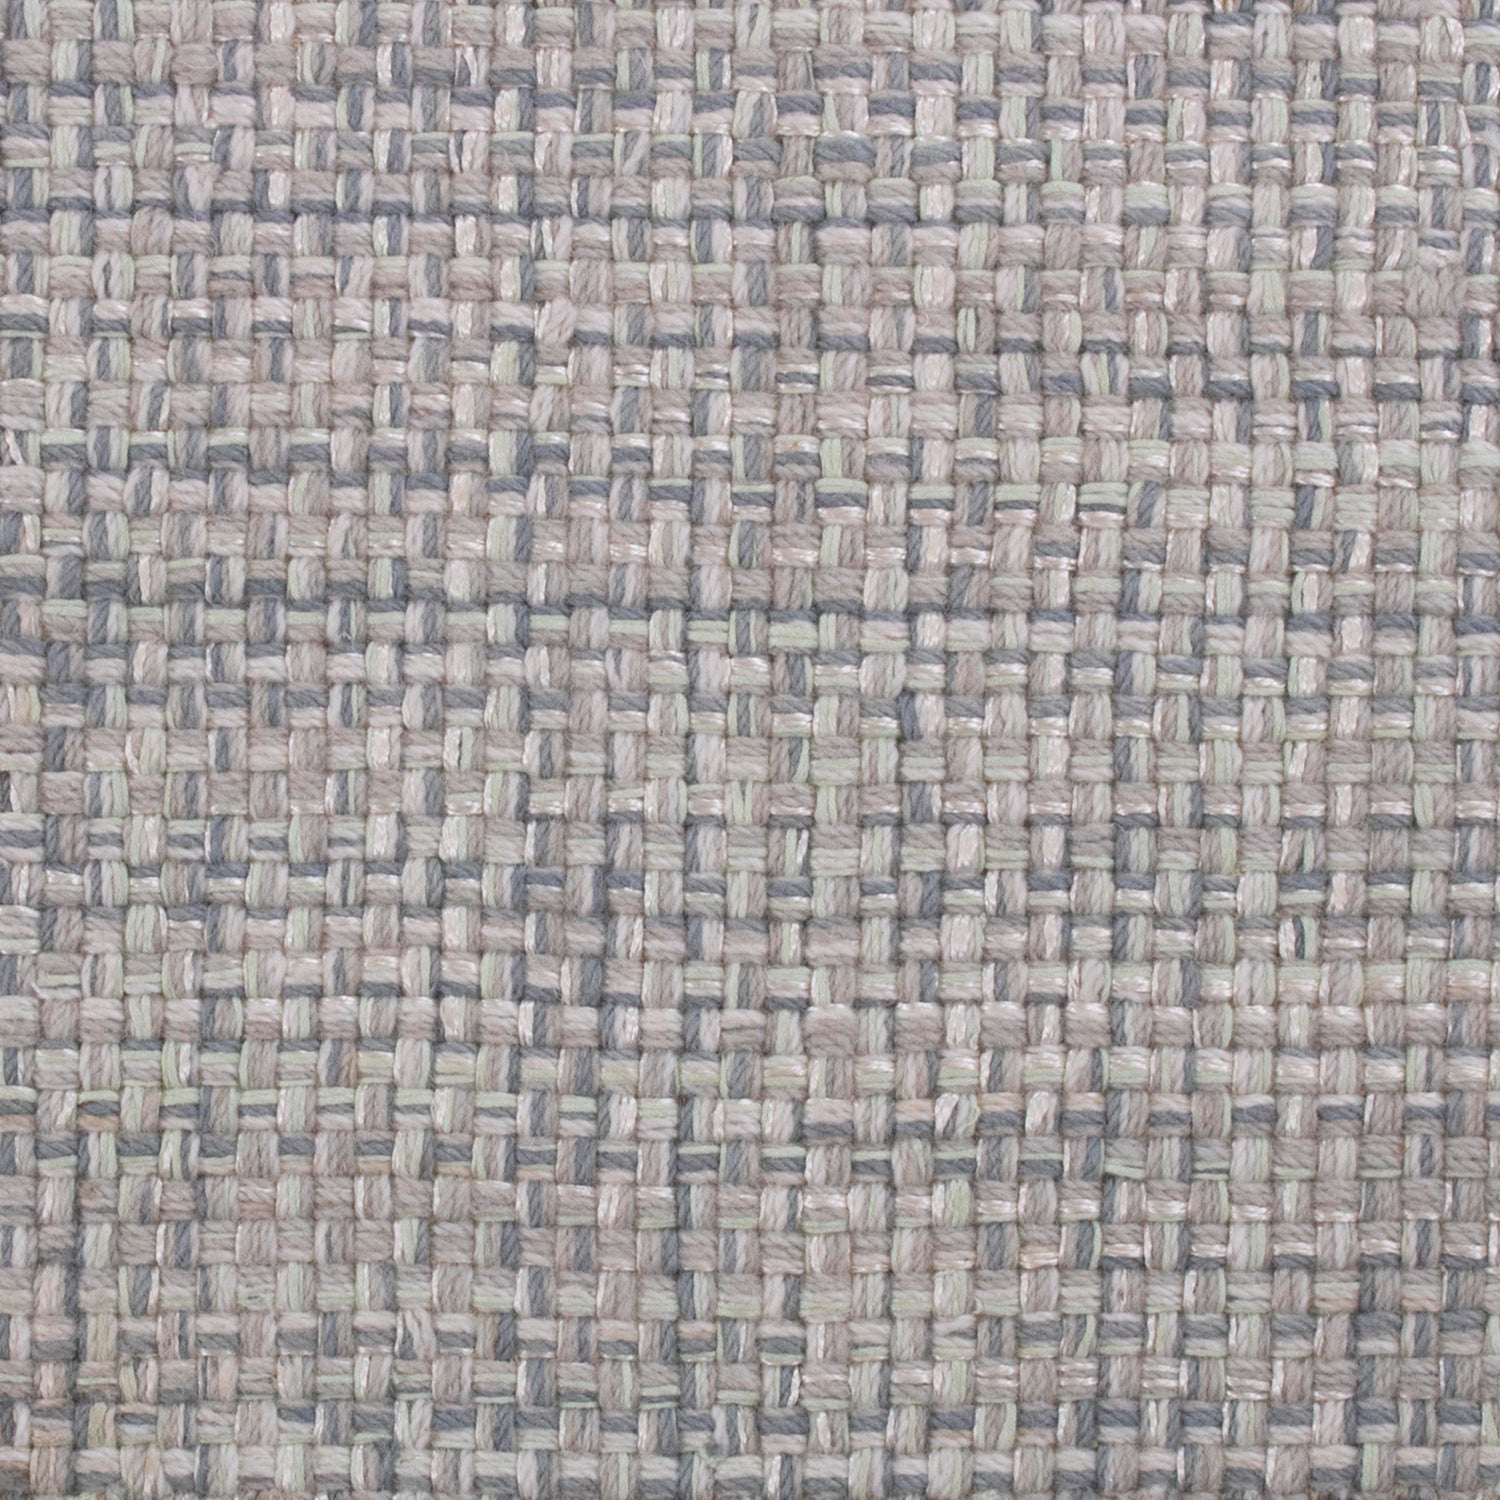 Wool-blend broadloom carpet swatch in a chunky grid weave in mottled blue-gray, gray and cream.